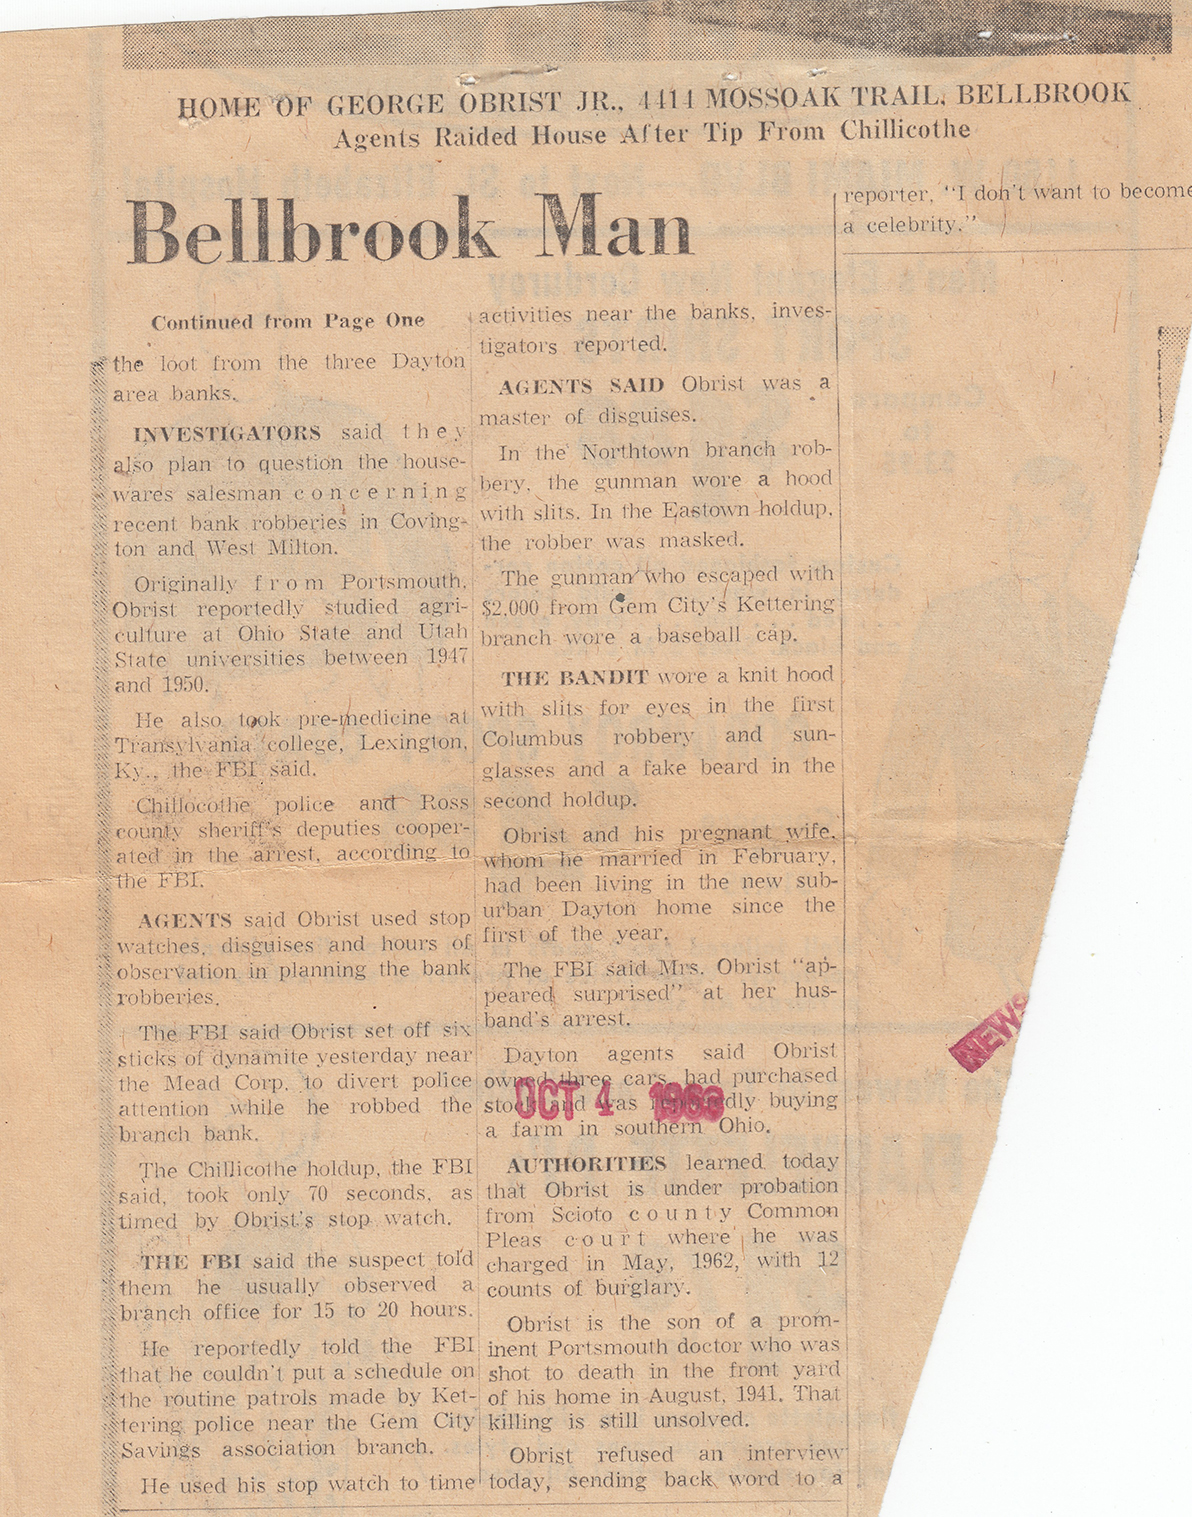 Bellbrook Man Charged with Six Robberies (continuation), Dayton Journal Herald, 5 Oct 1963